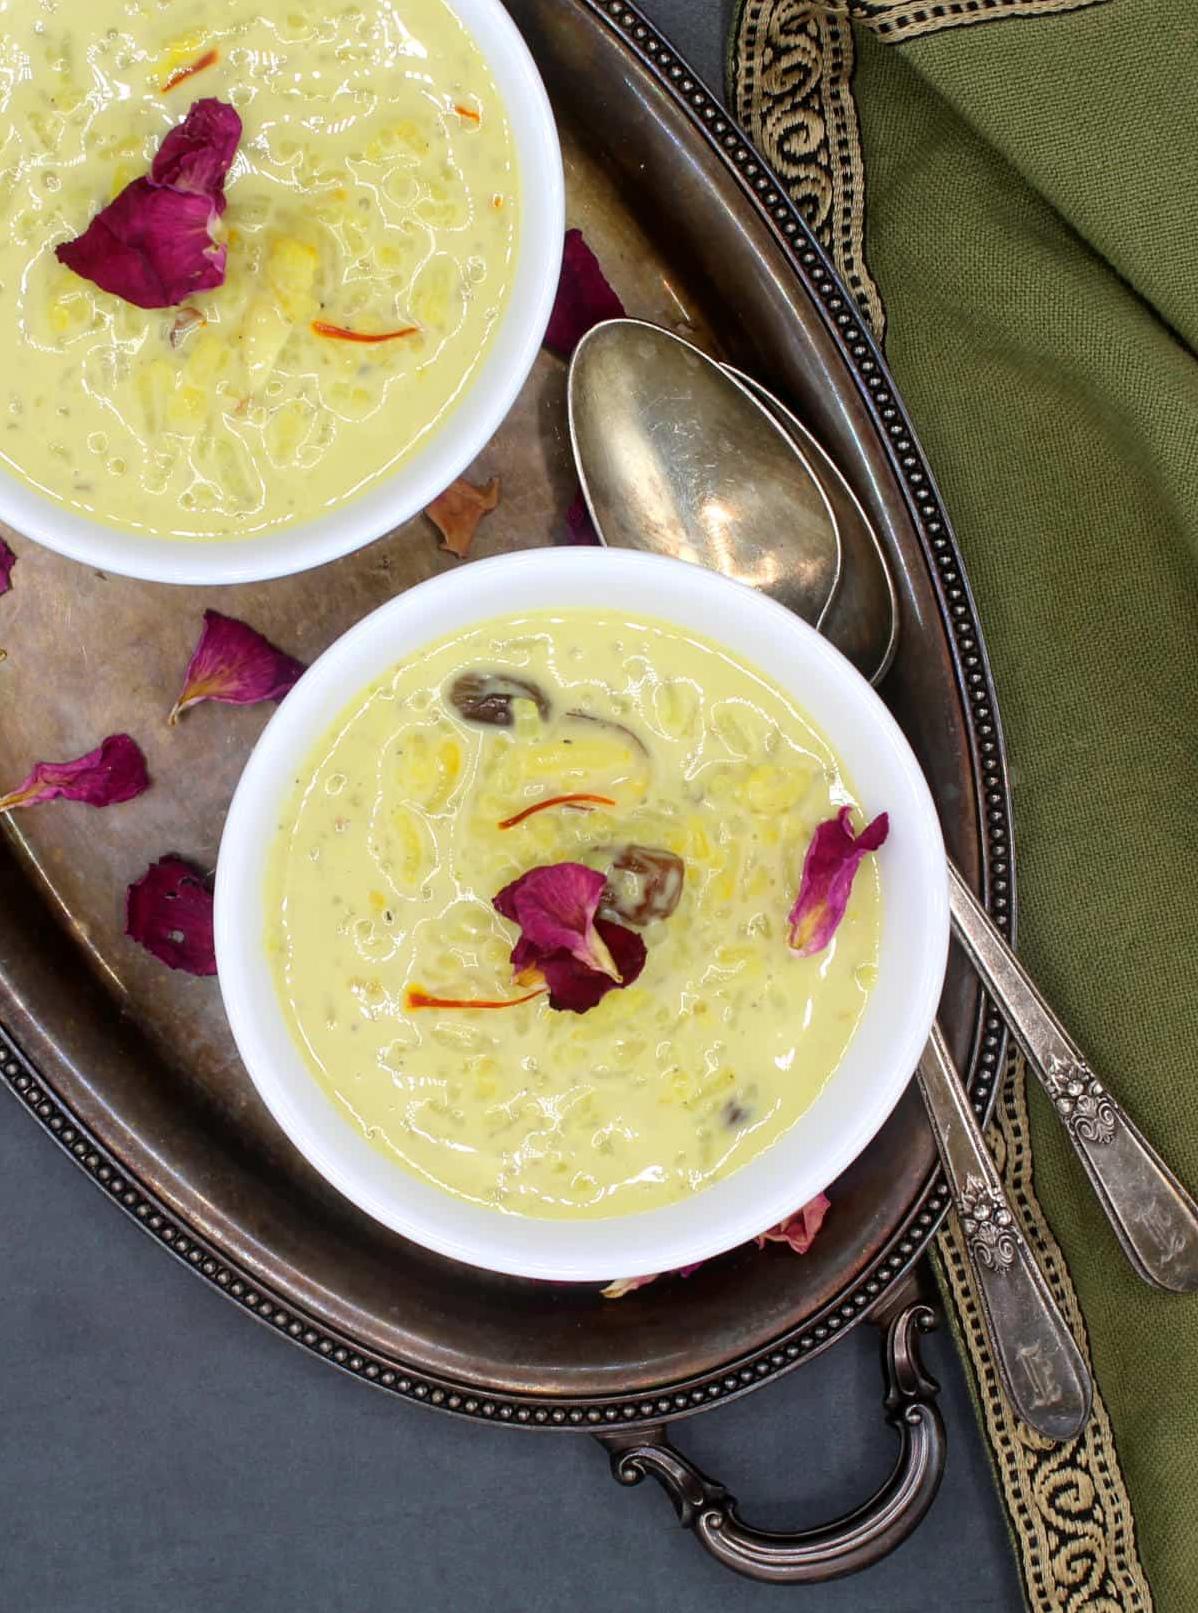  Indulge in a delicious and guilt-free dessert with our vegan Chia Kheer